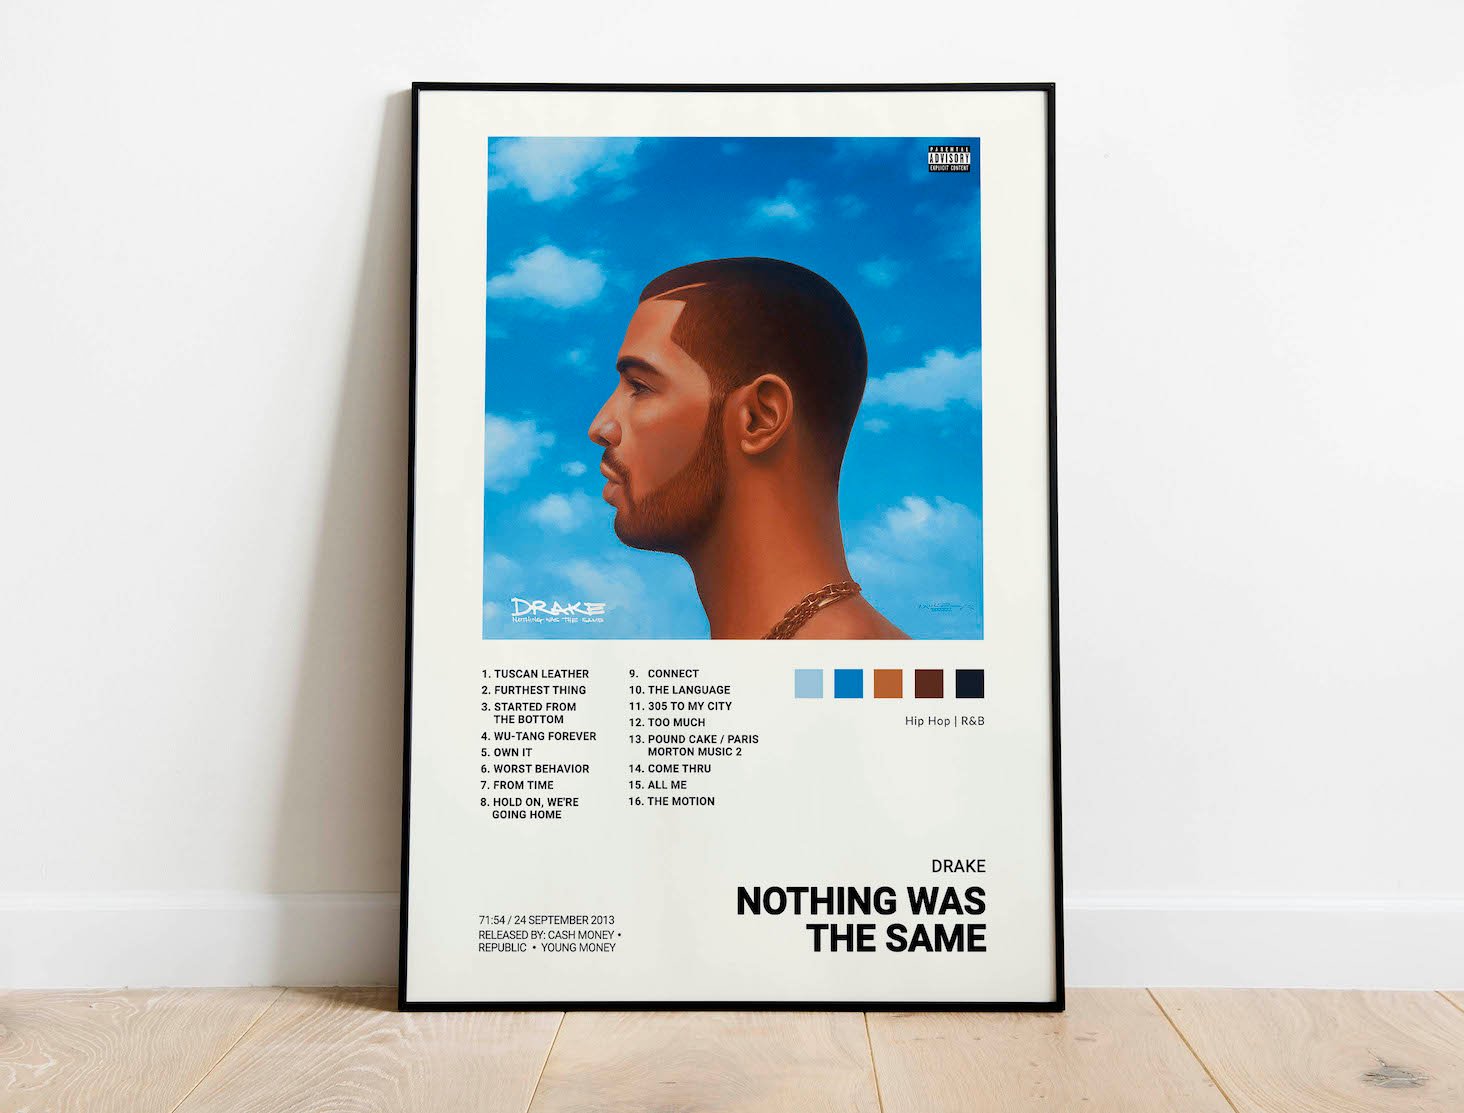 Drake "Nothing Was the Same " Art Music Album Poster HD Print Multi Sizes Deluxe 